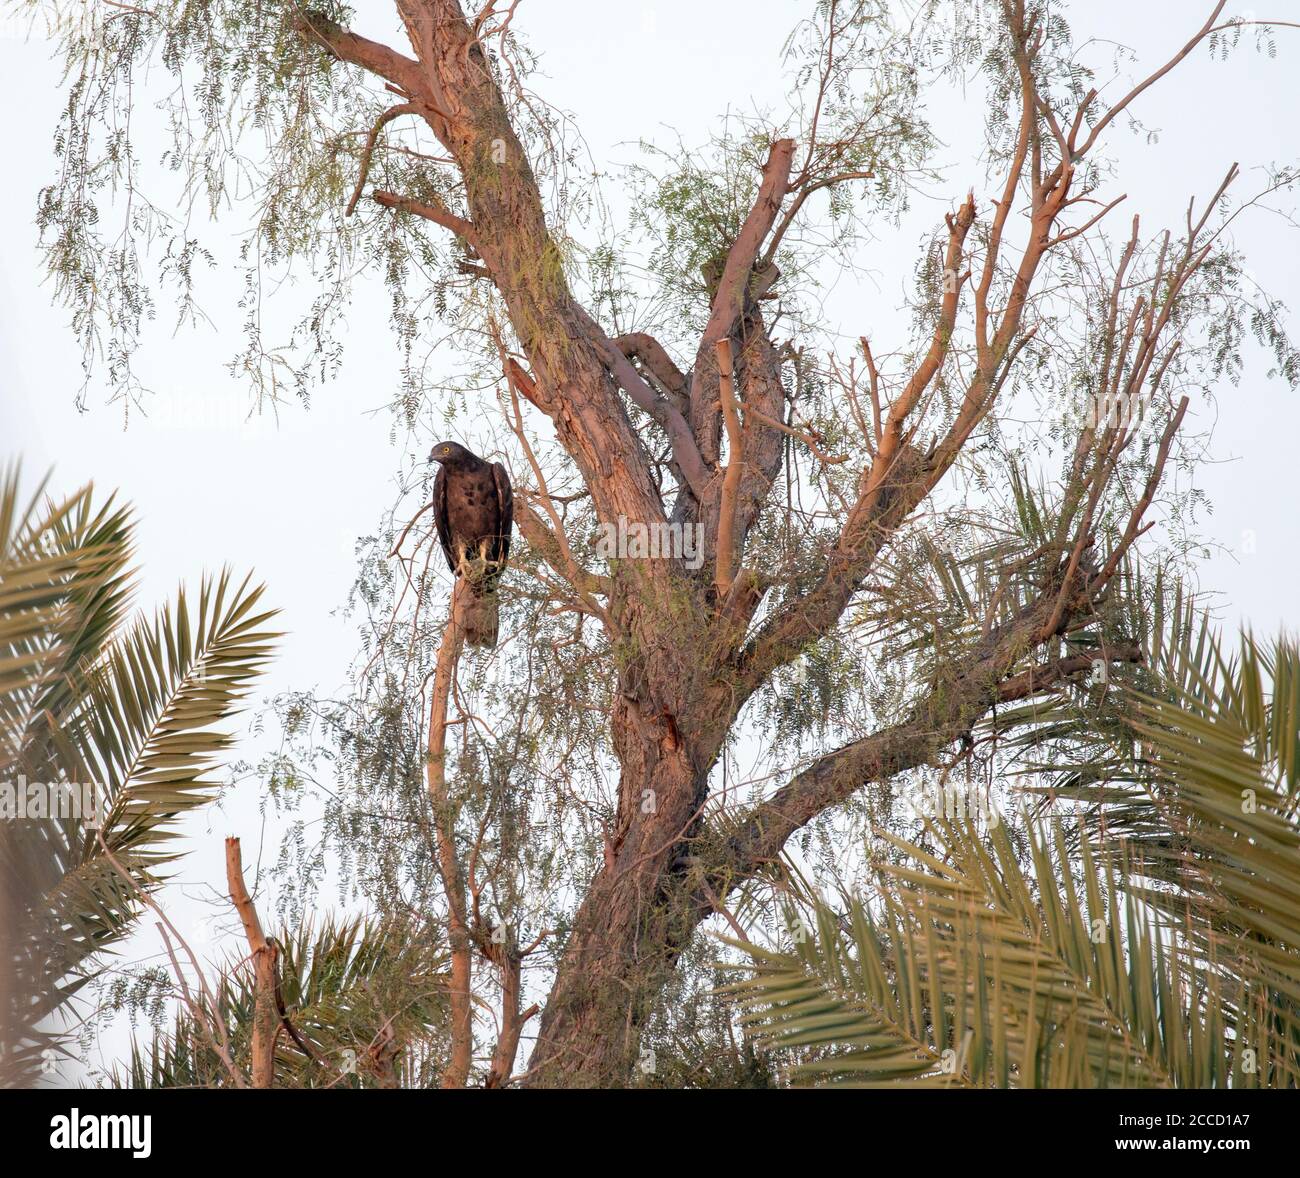 Oriental Honey Buzzard (Pernis ptilorhynchus), also known as Crested Honey Buzzard. Female perched in a tree. Stock Photo